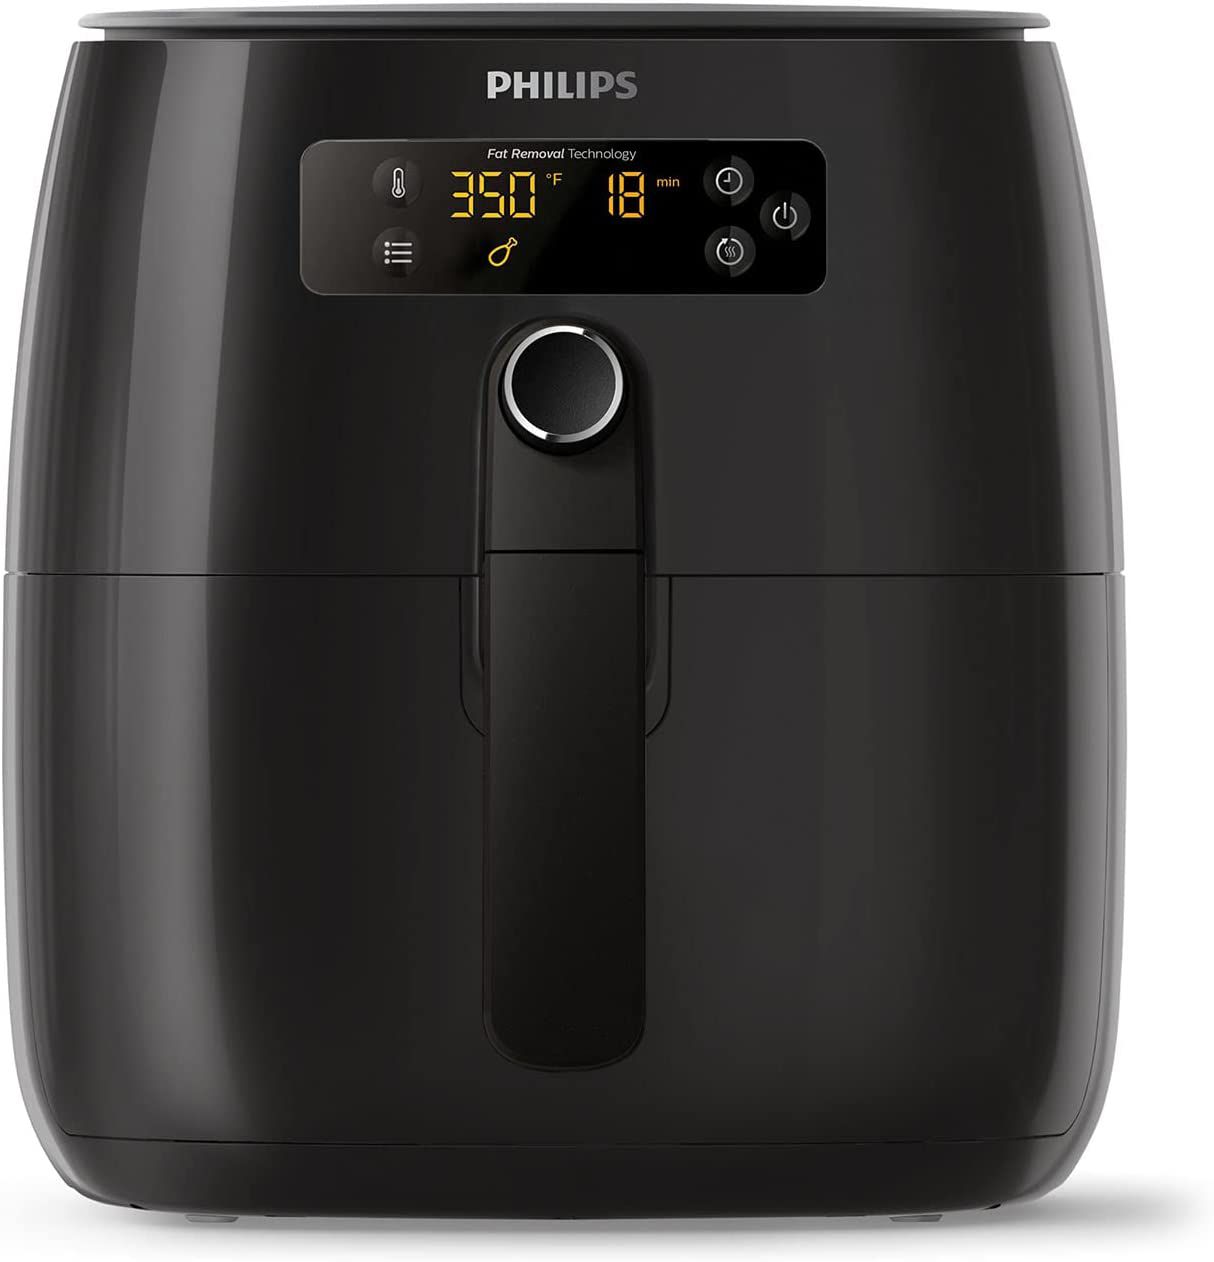 a philips air fryer on a white background